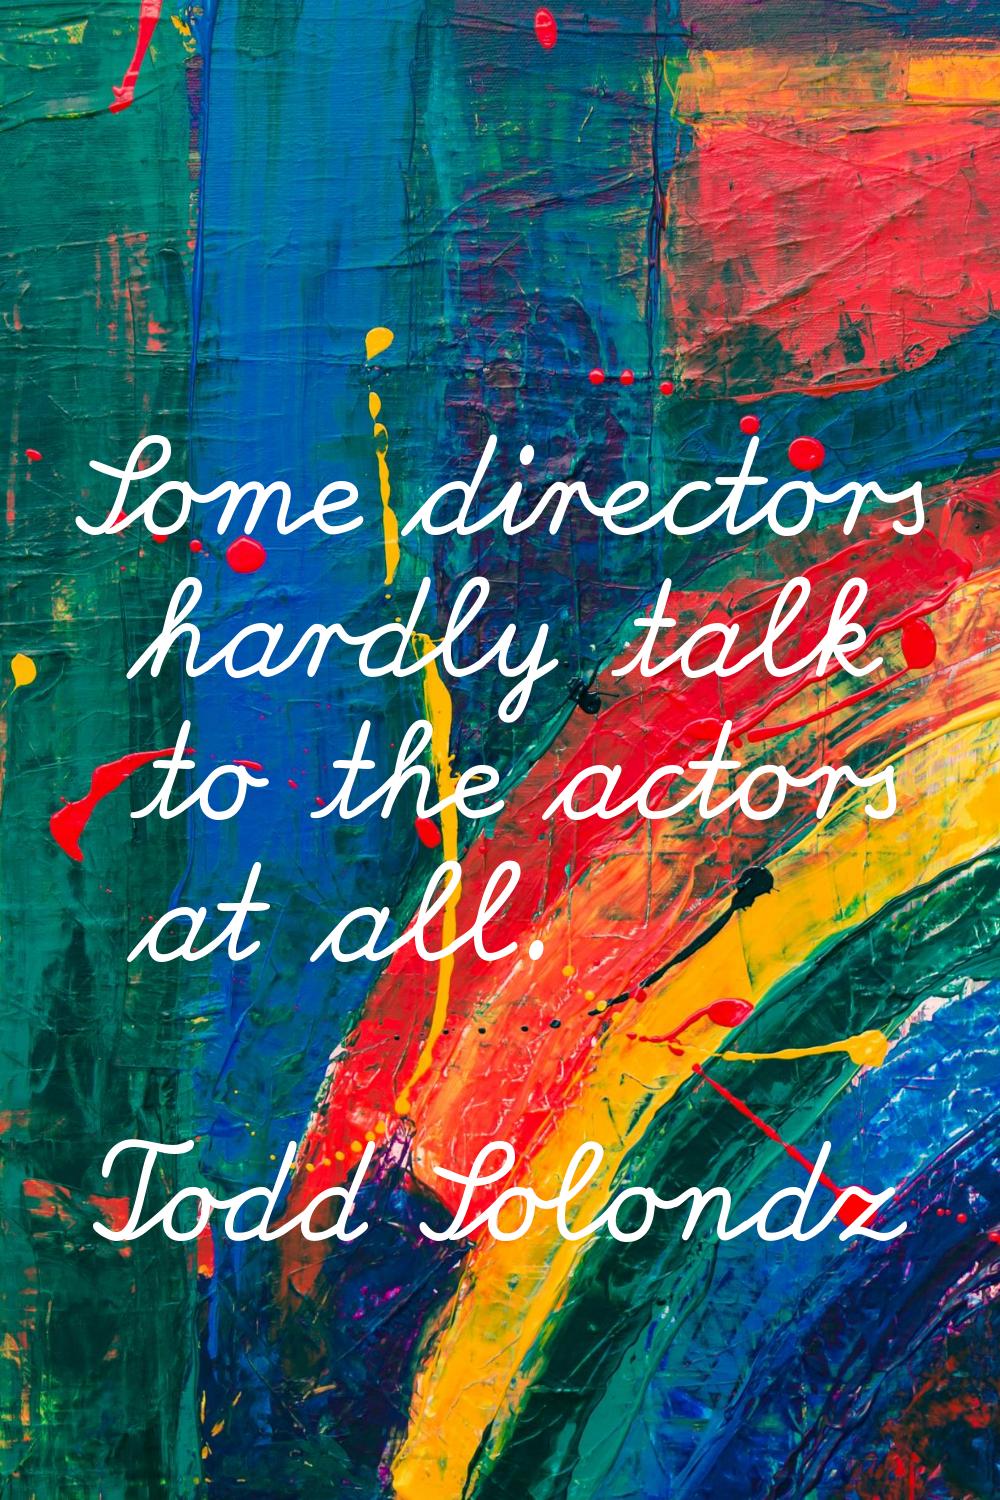 Some directors hardly talk to the actors at all.